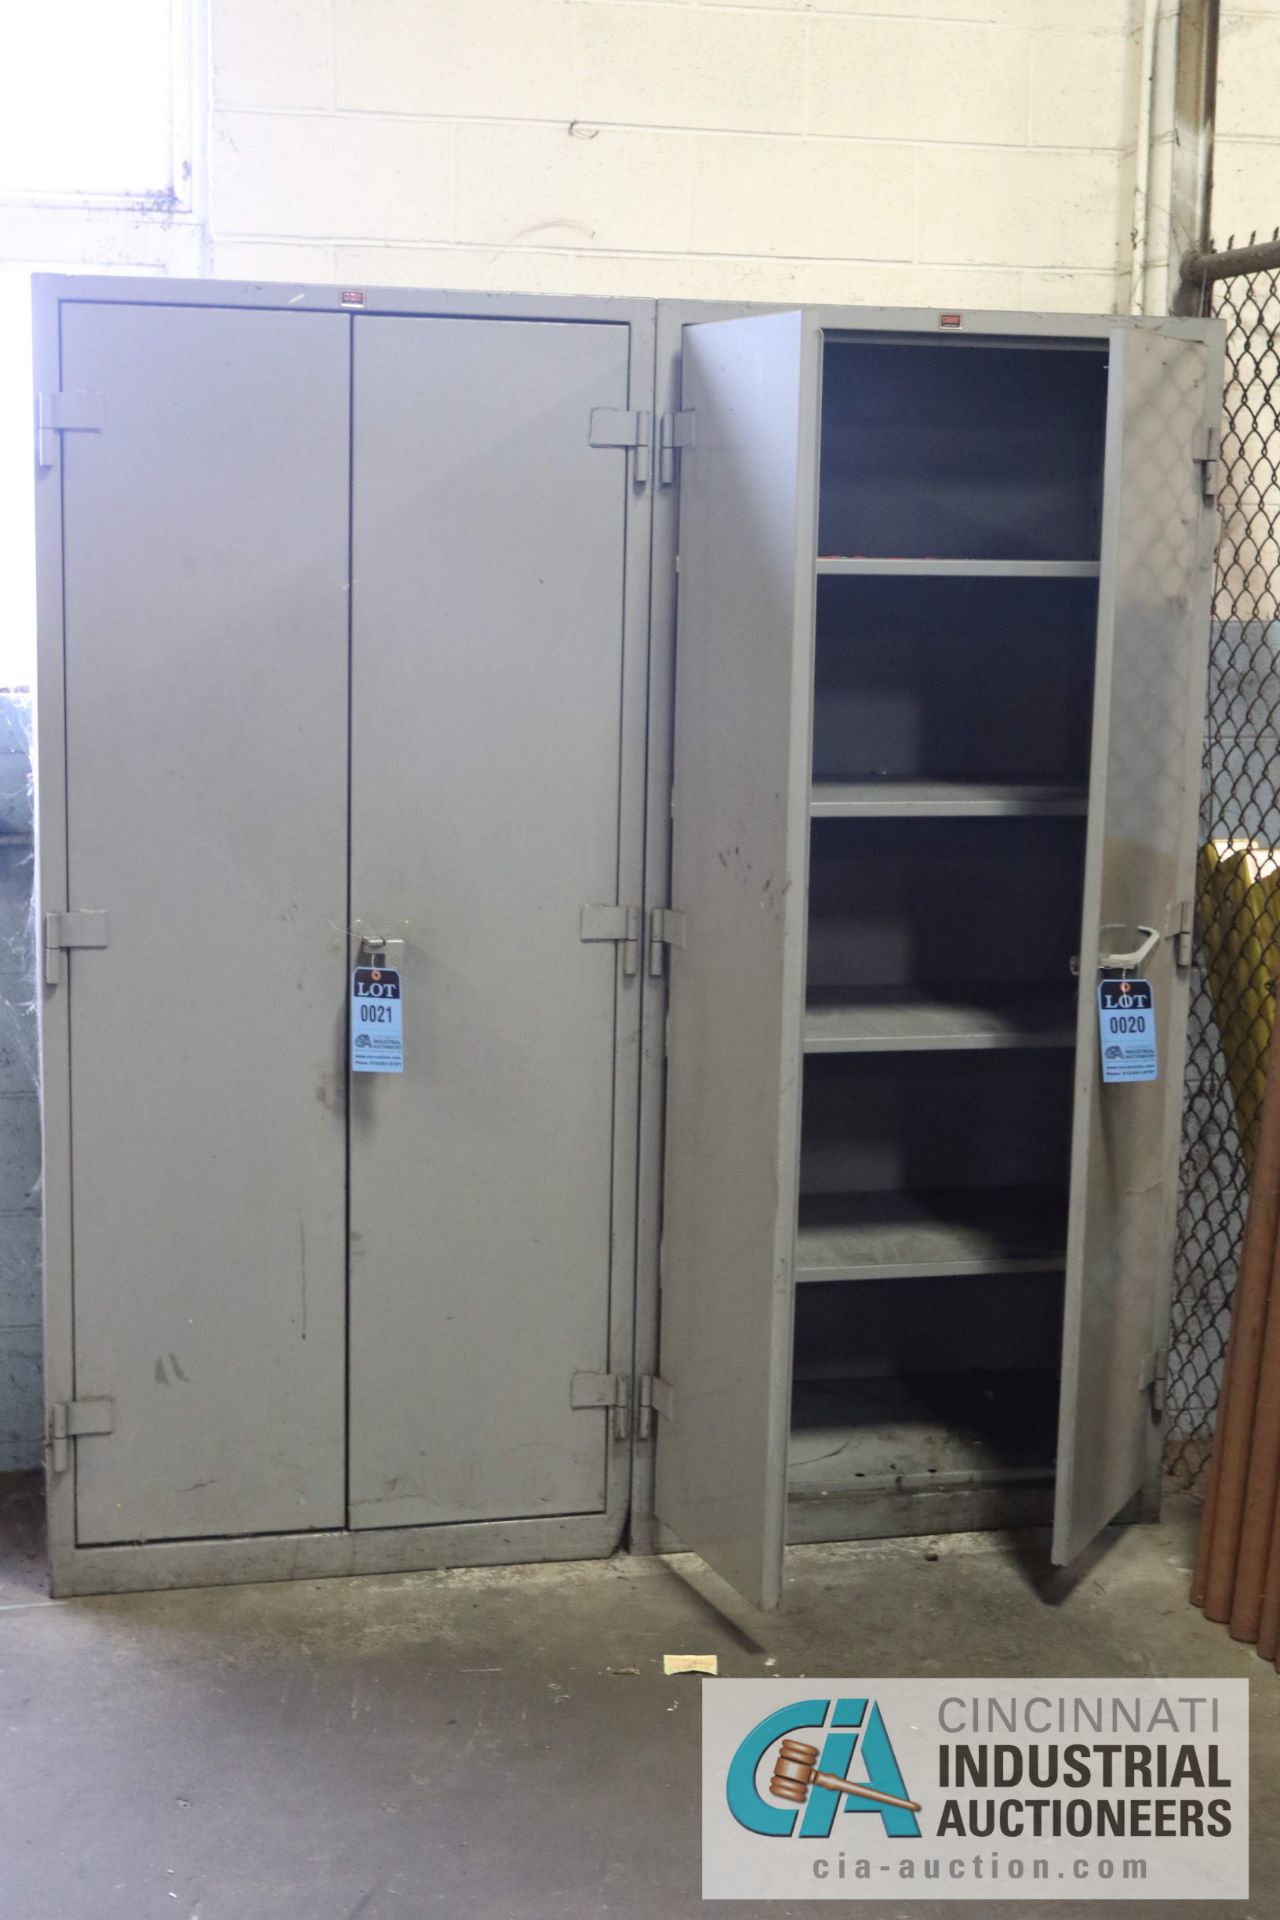 36" X 21" X 78" LYON CABINET W/ SHELVES - $10.00 Rigging Fee Due to Onsite Rigger - Located in